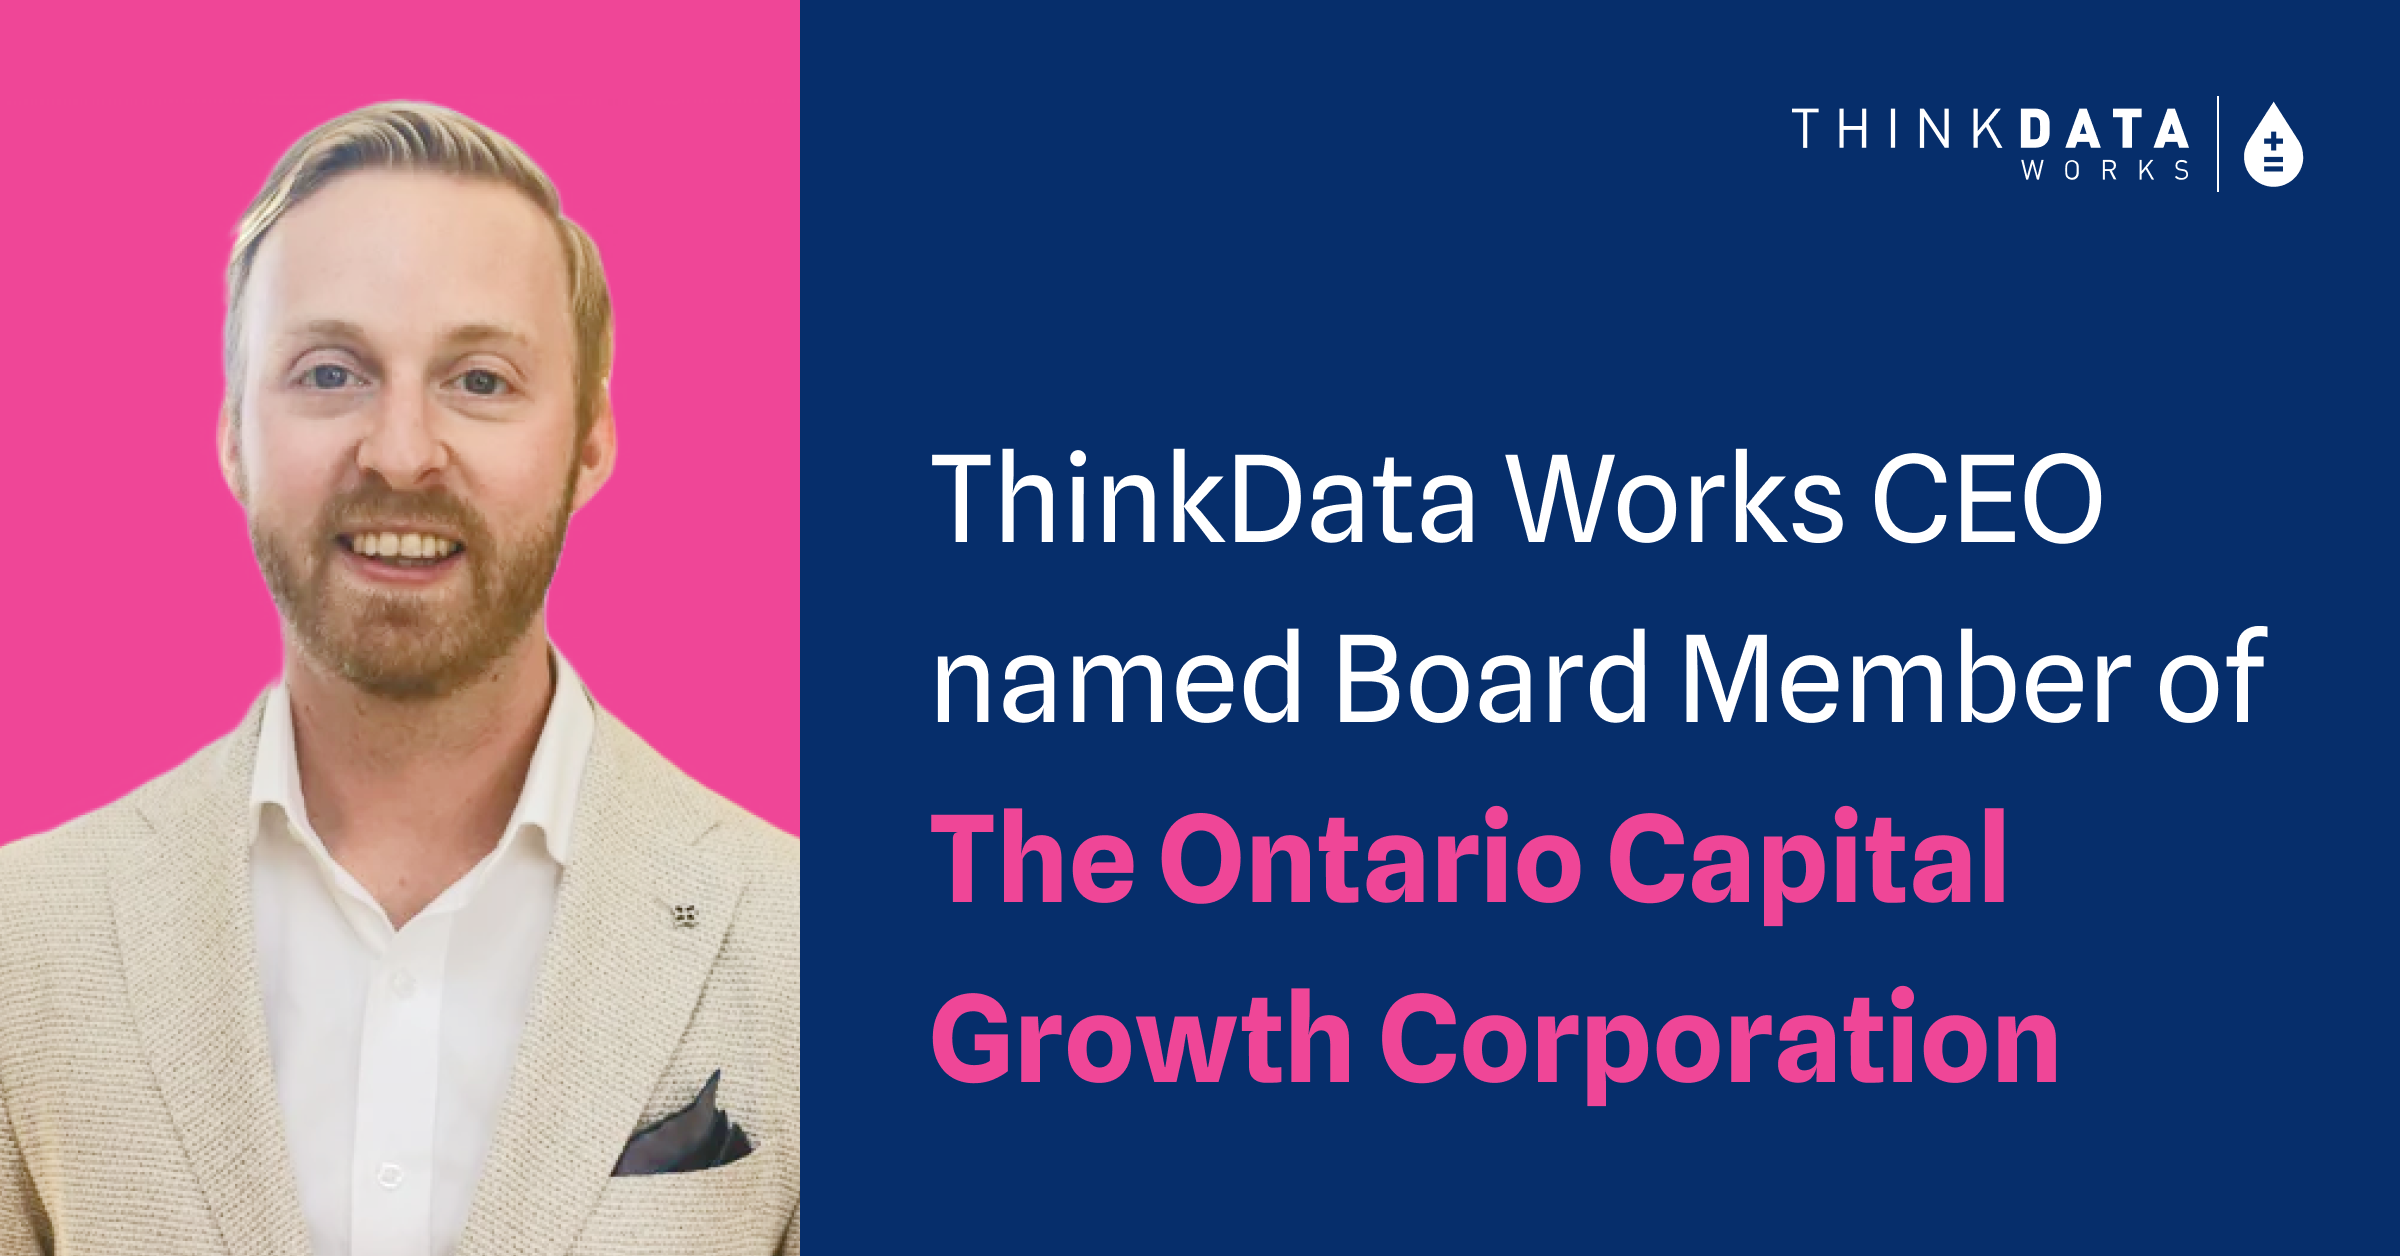 ThinkData Works CEO named Board member of The Ontario Capital Growth Corporation